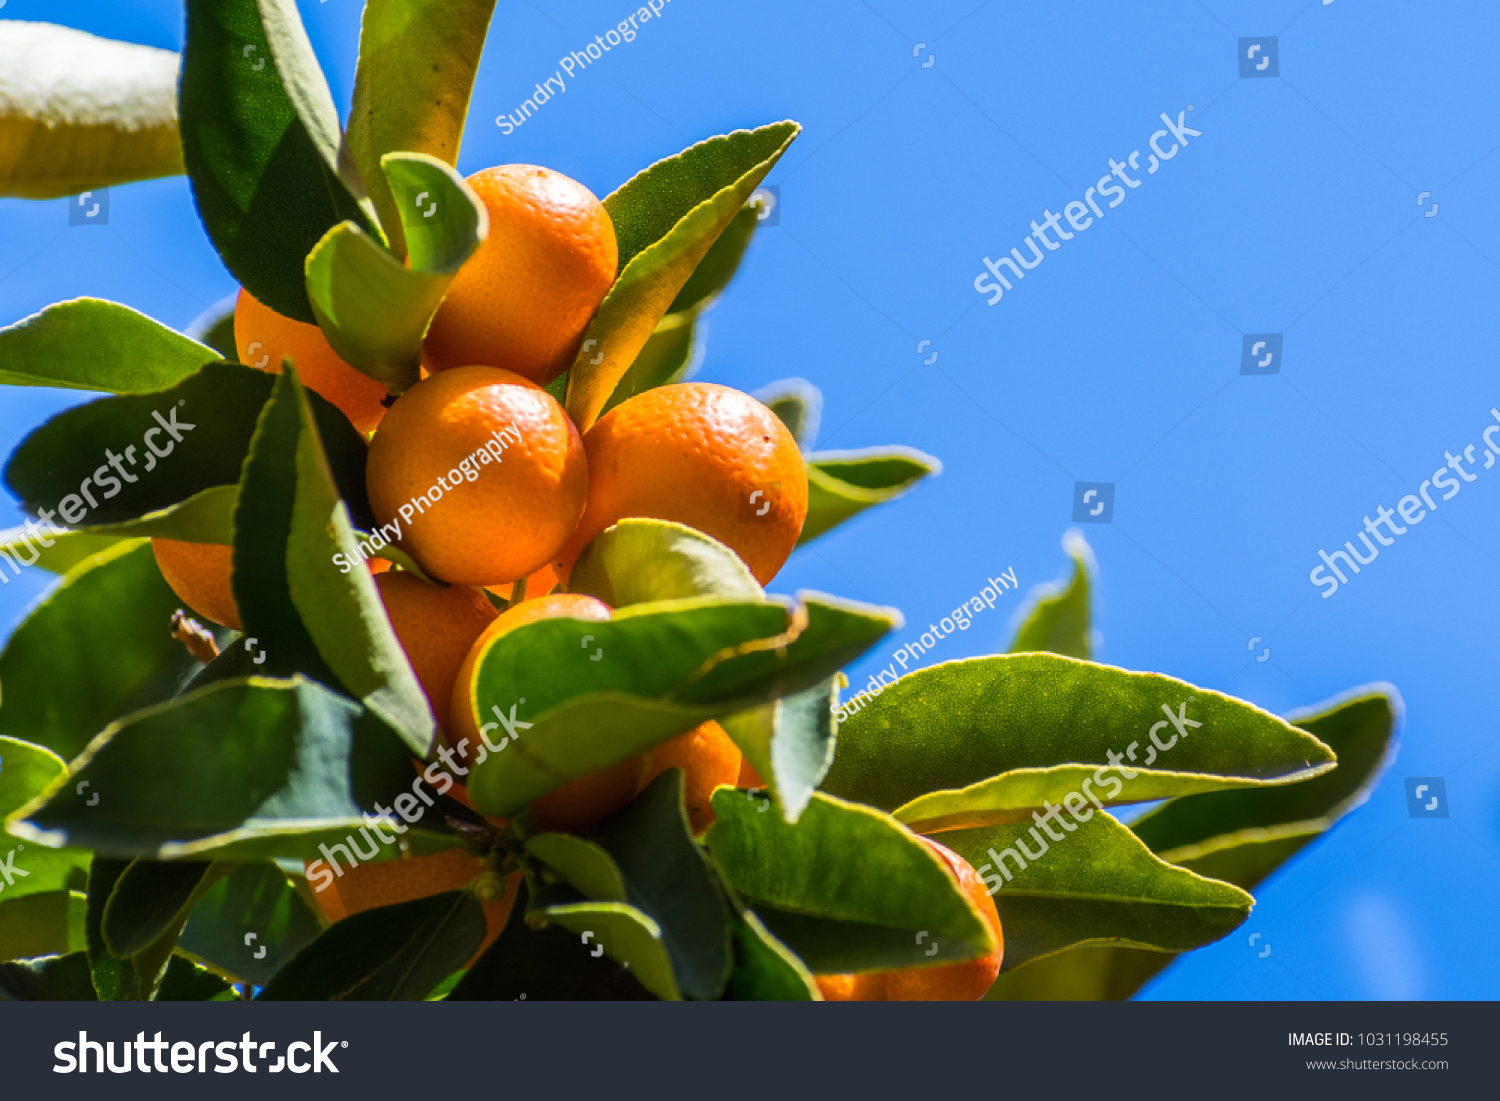 Looking up to ripe Kumquat fruit on a tree branch; blue sky background; San Francisco bay area, California #1031198455